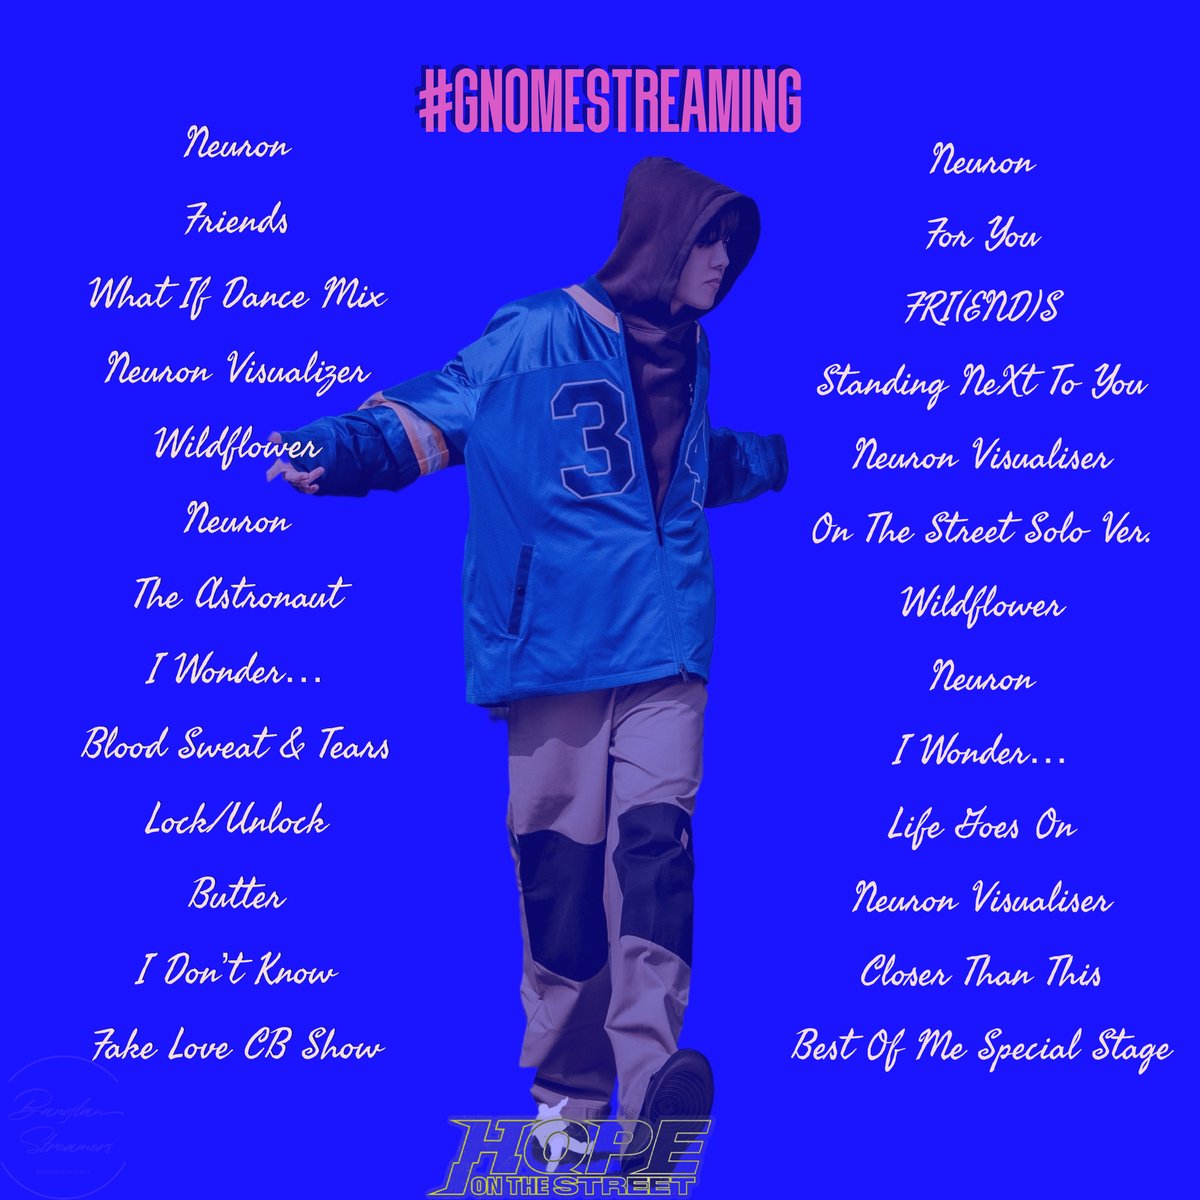 Hello and welcome to #gnomestreaming Get some YT streams in before end of tracking week. Search & stream listed MVs listed below⬇️⬇️ If you can't search manually, pls use this short PL. Consider turning it into a queue! ▶️youtube.com/playlist?list=… #HOPE_ON_THE_STREET